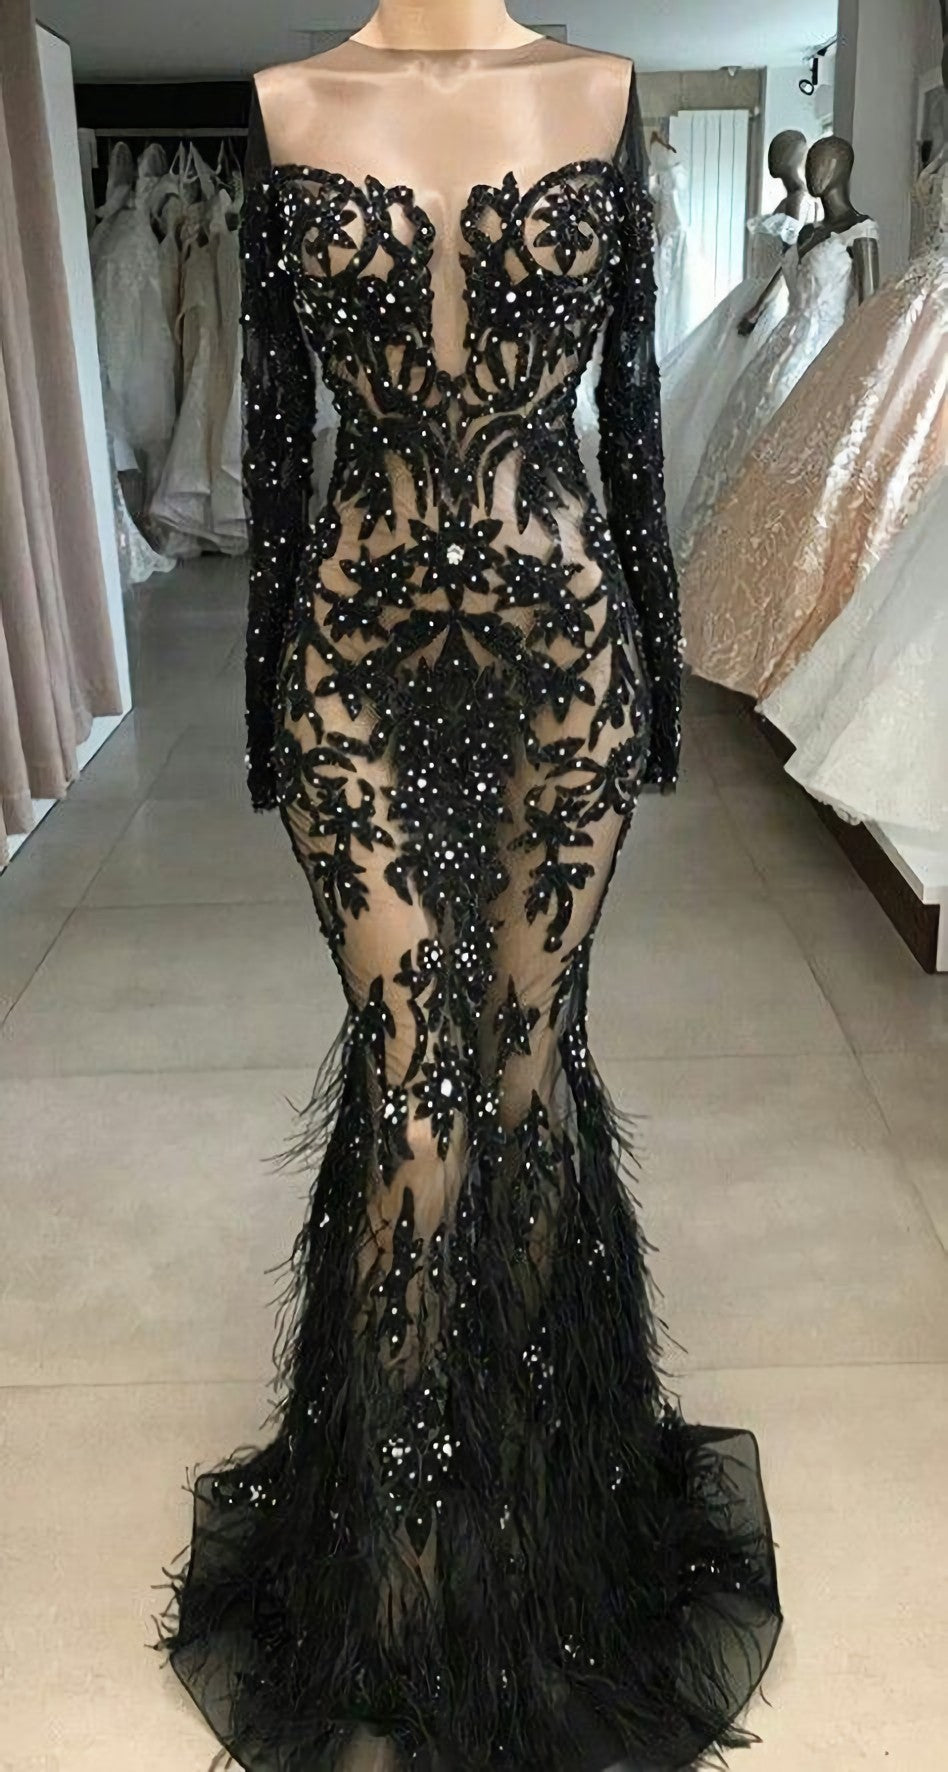 Party Dress Long Sleeve, Black Prom Dresses, Feather Prom Dresses, Lace Evening Dresses, Fashion Party Dresses, Mermaid Evening Dresses, Beaded Prom Dresses, Pearls Prom Dresses, Mermaid Evening Gowns